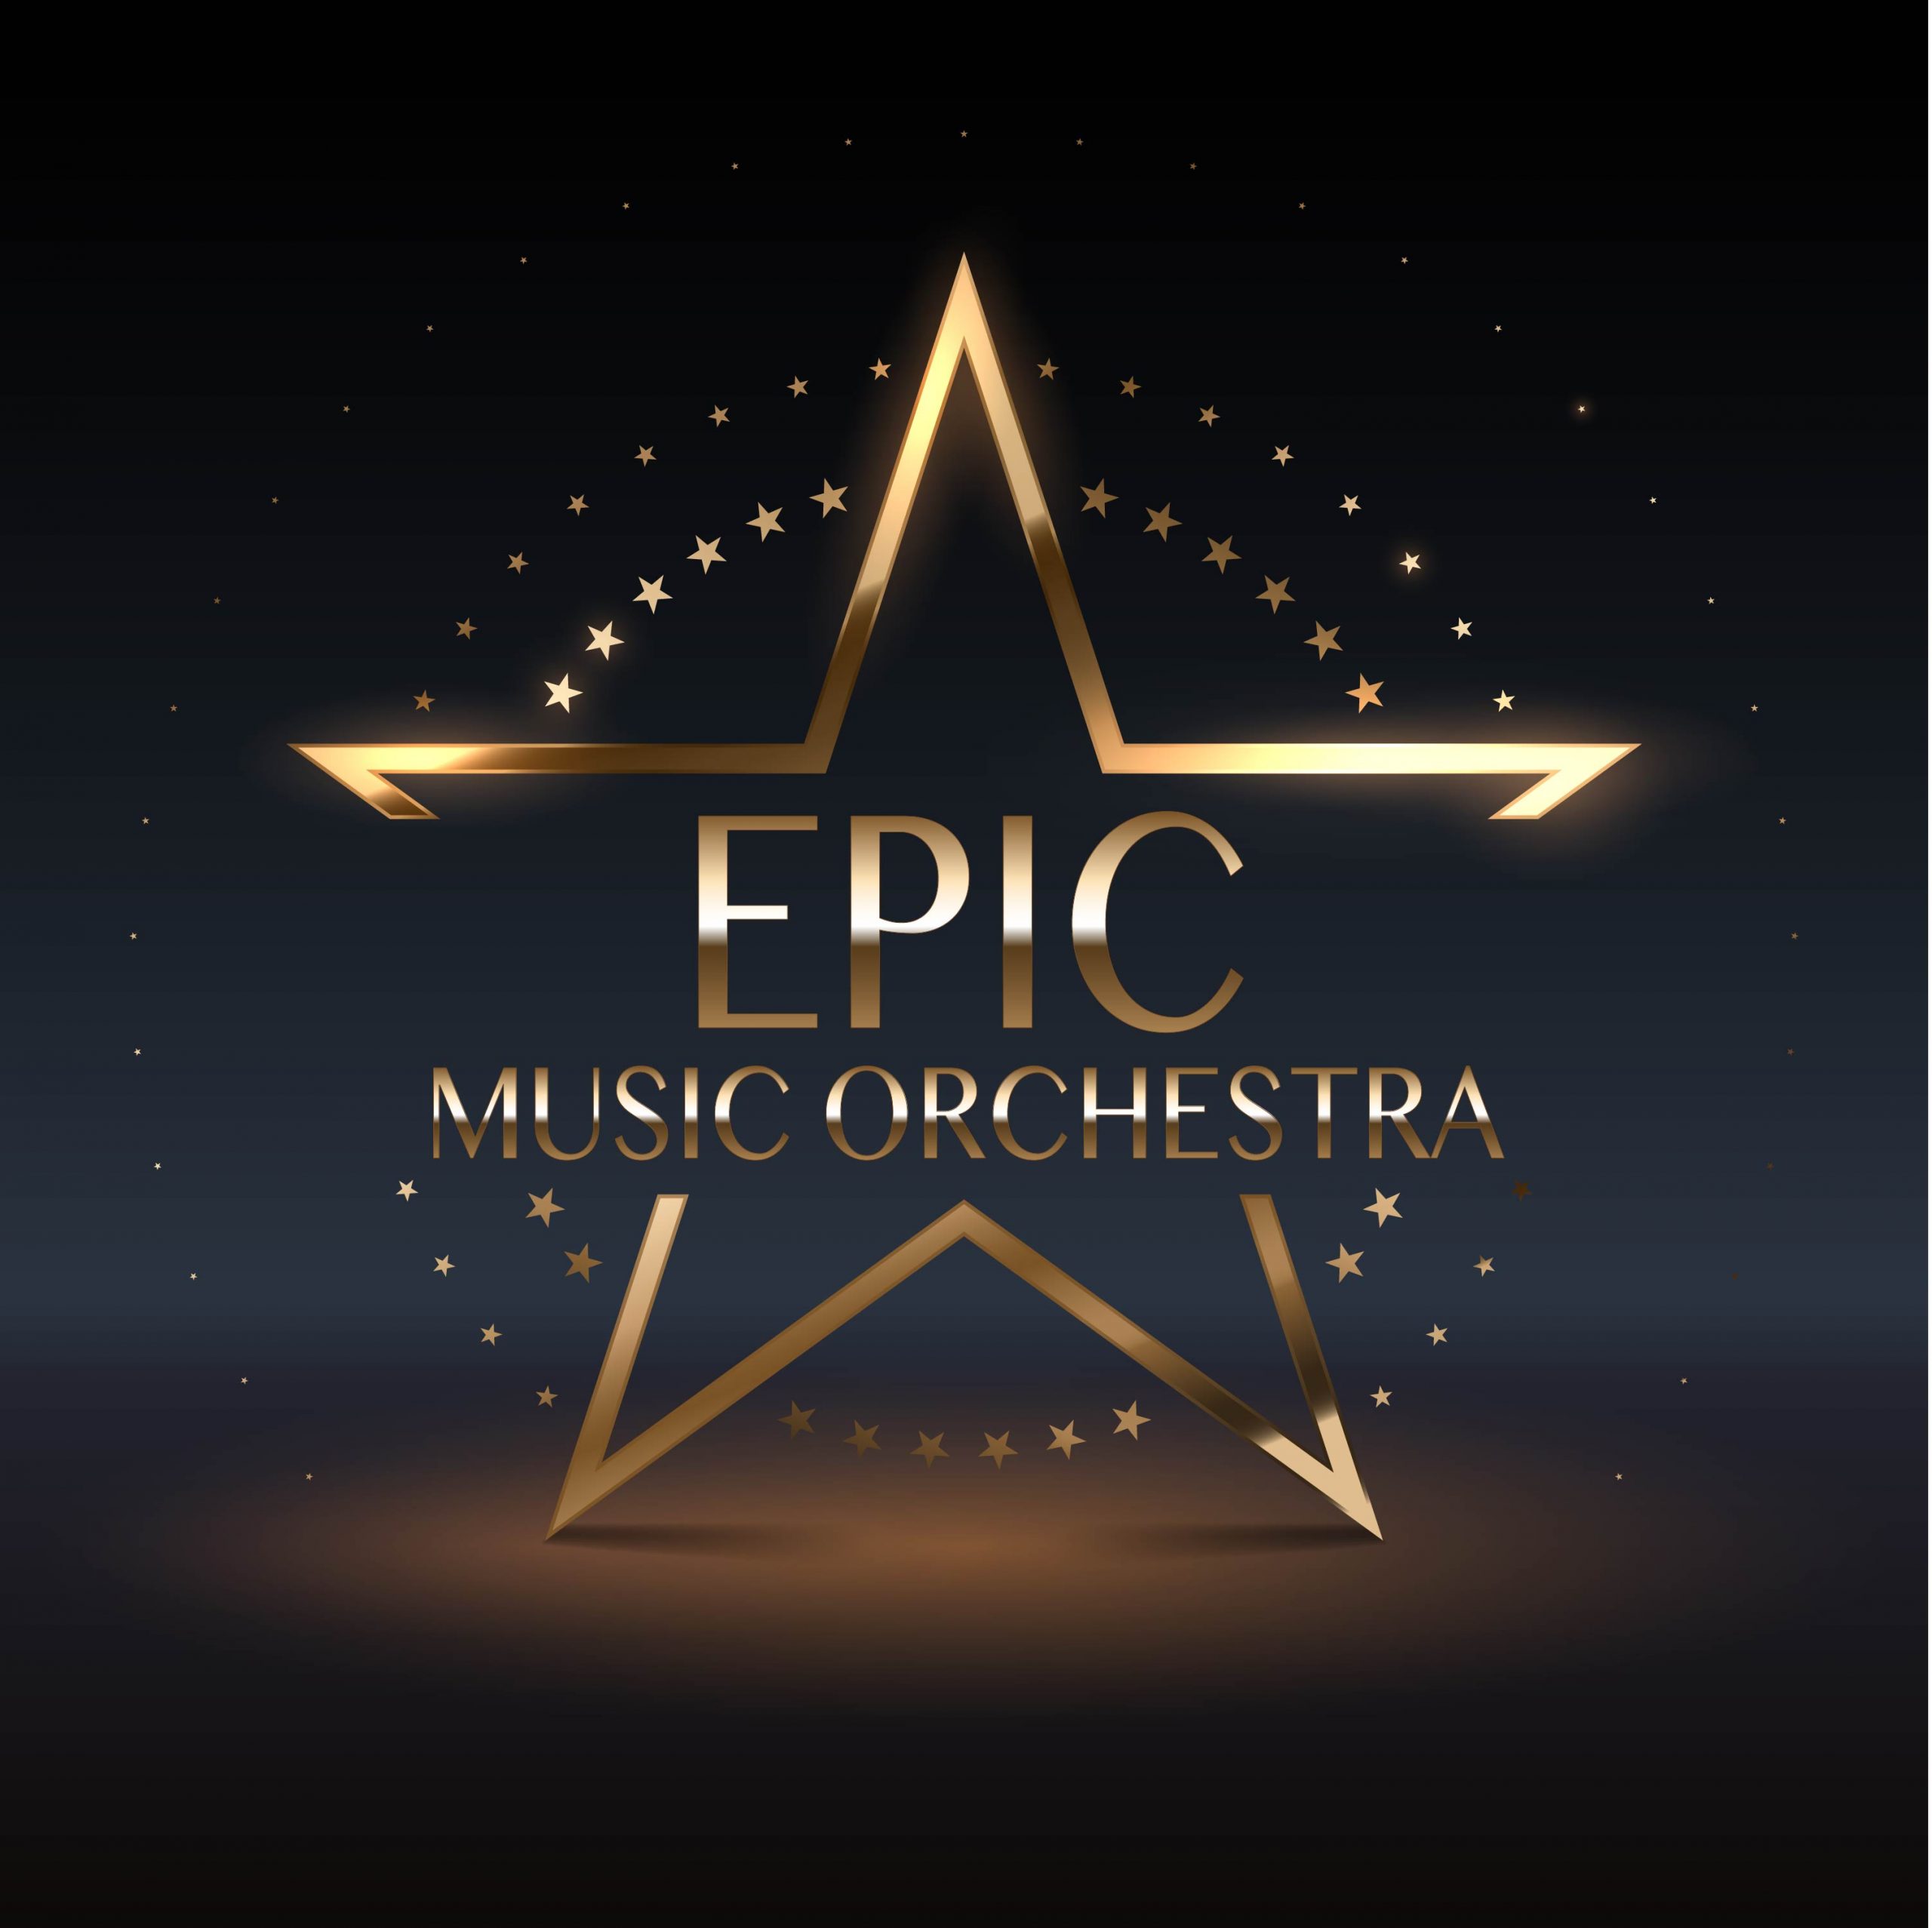 EPIC MUSIC ORCHESTRA